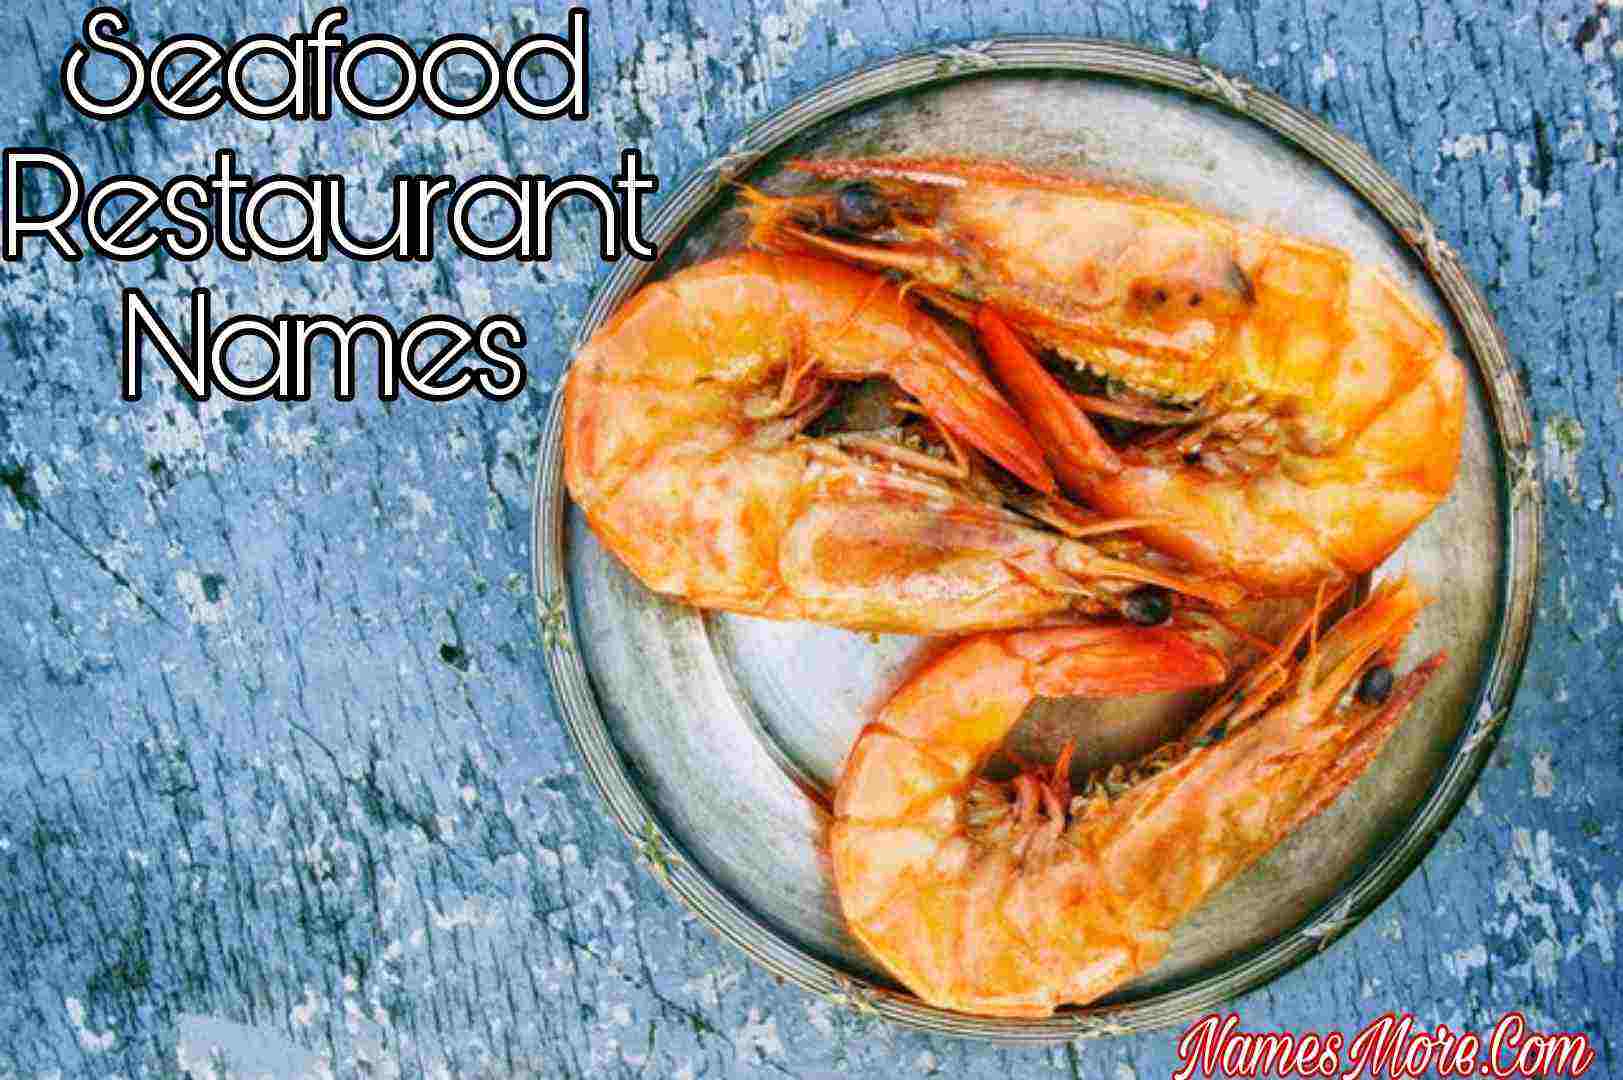 Featured Image for Seafood Restaurant Names